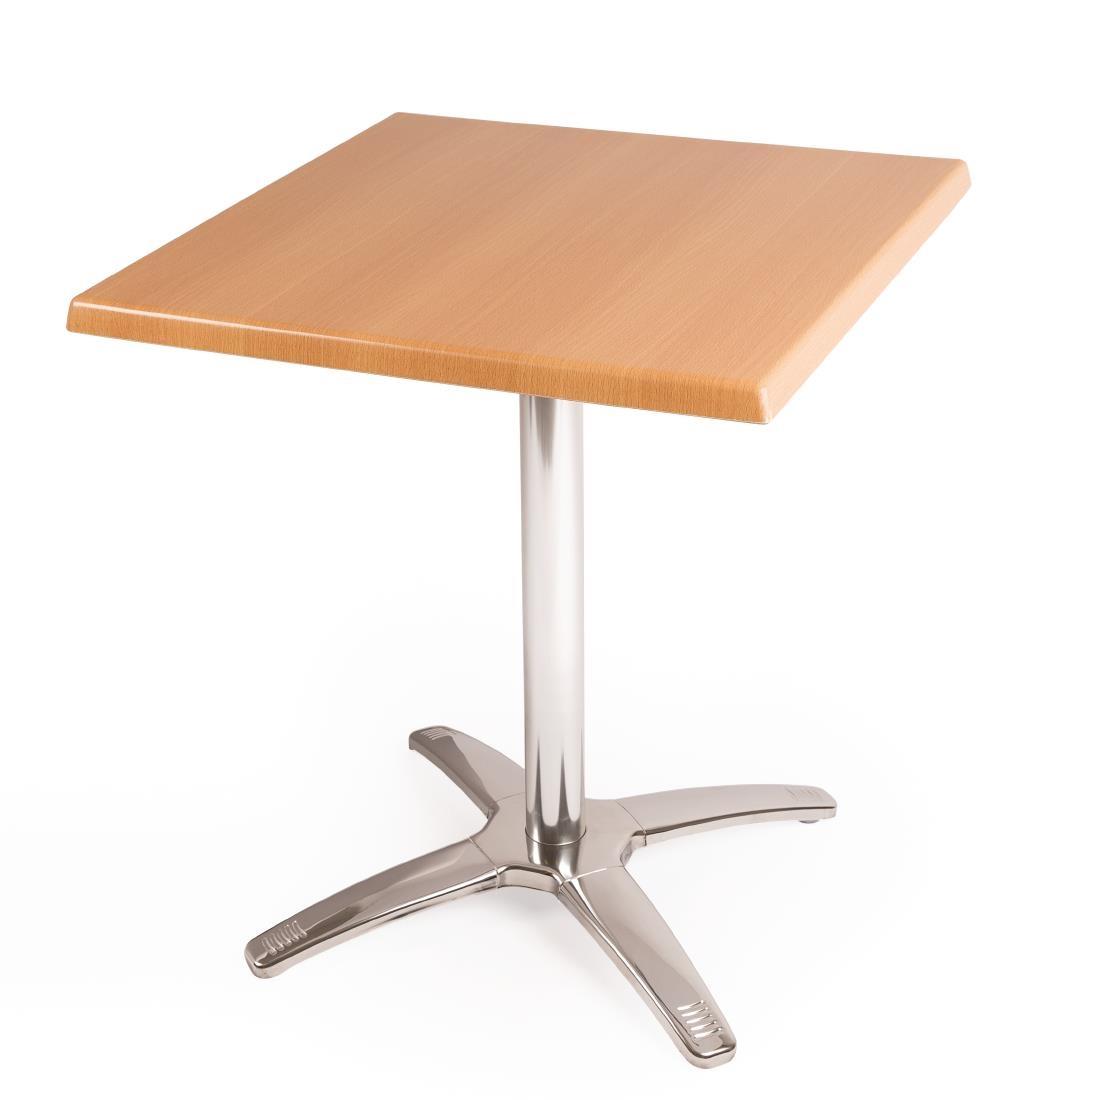 Special Offer Bolero Square Beech Table Top and Base Combo - SA224  - 1